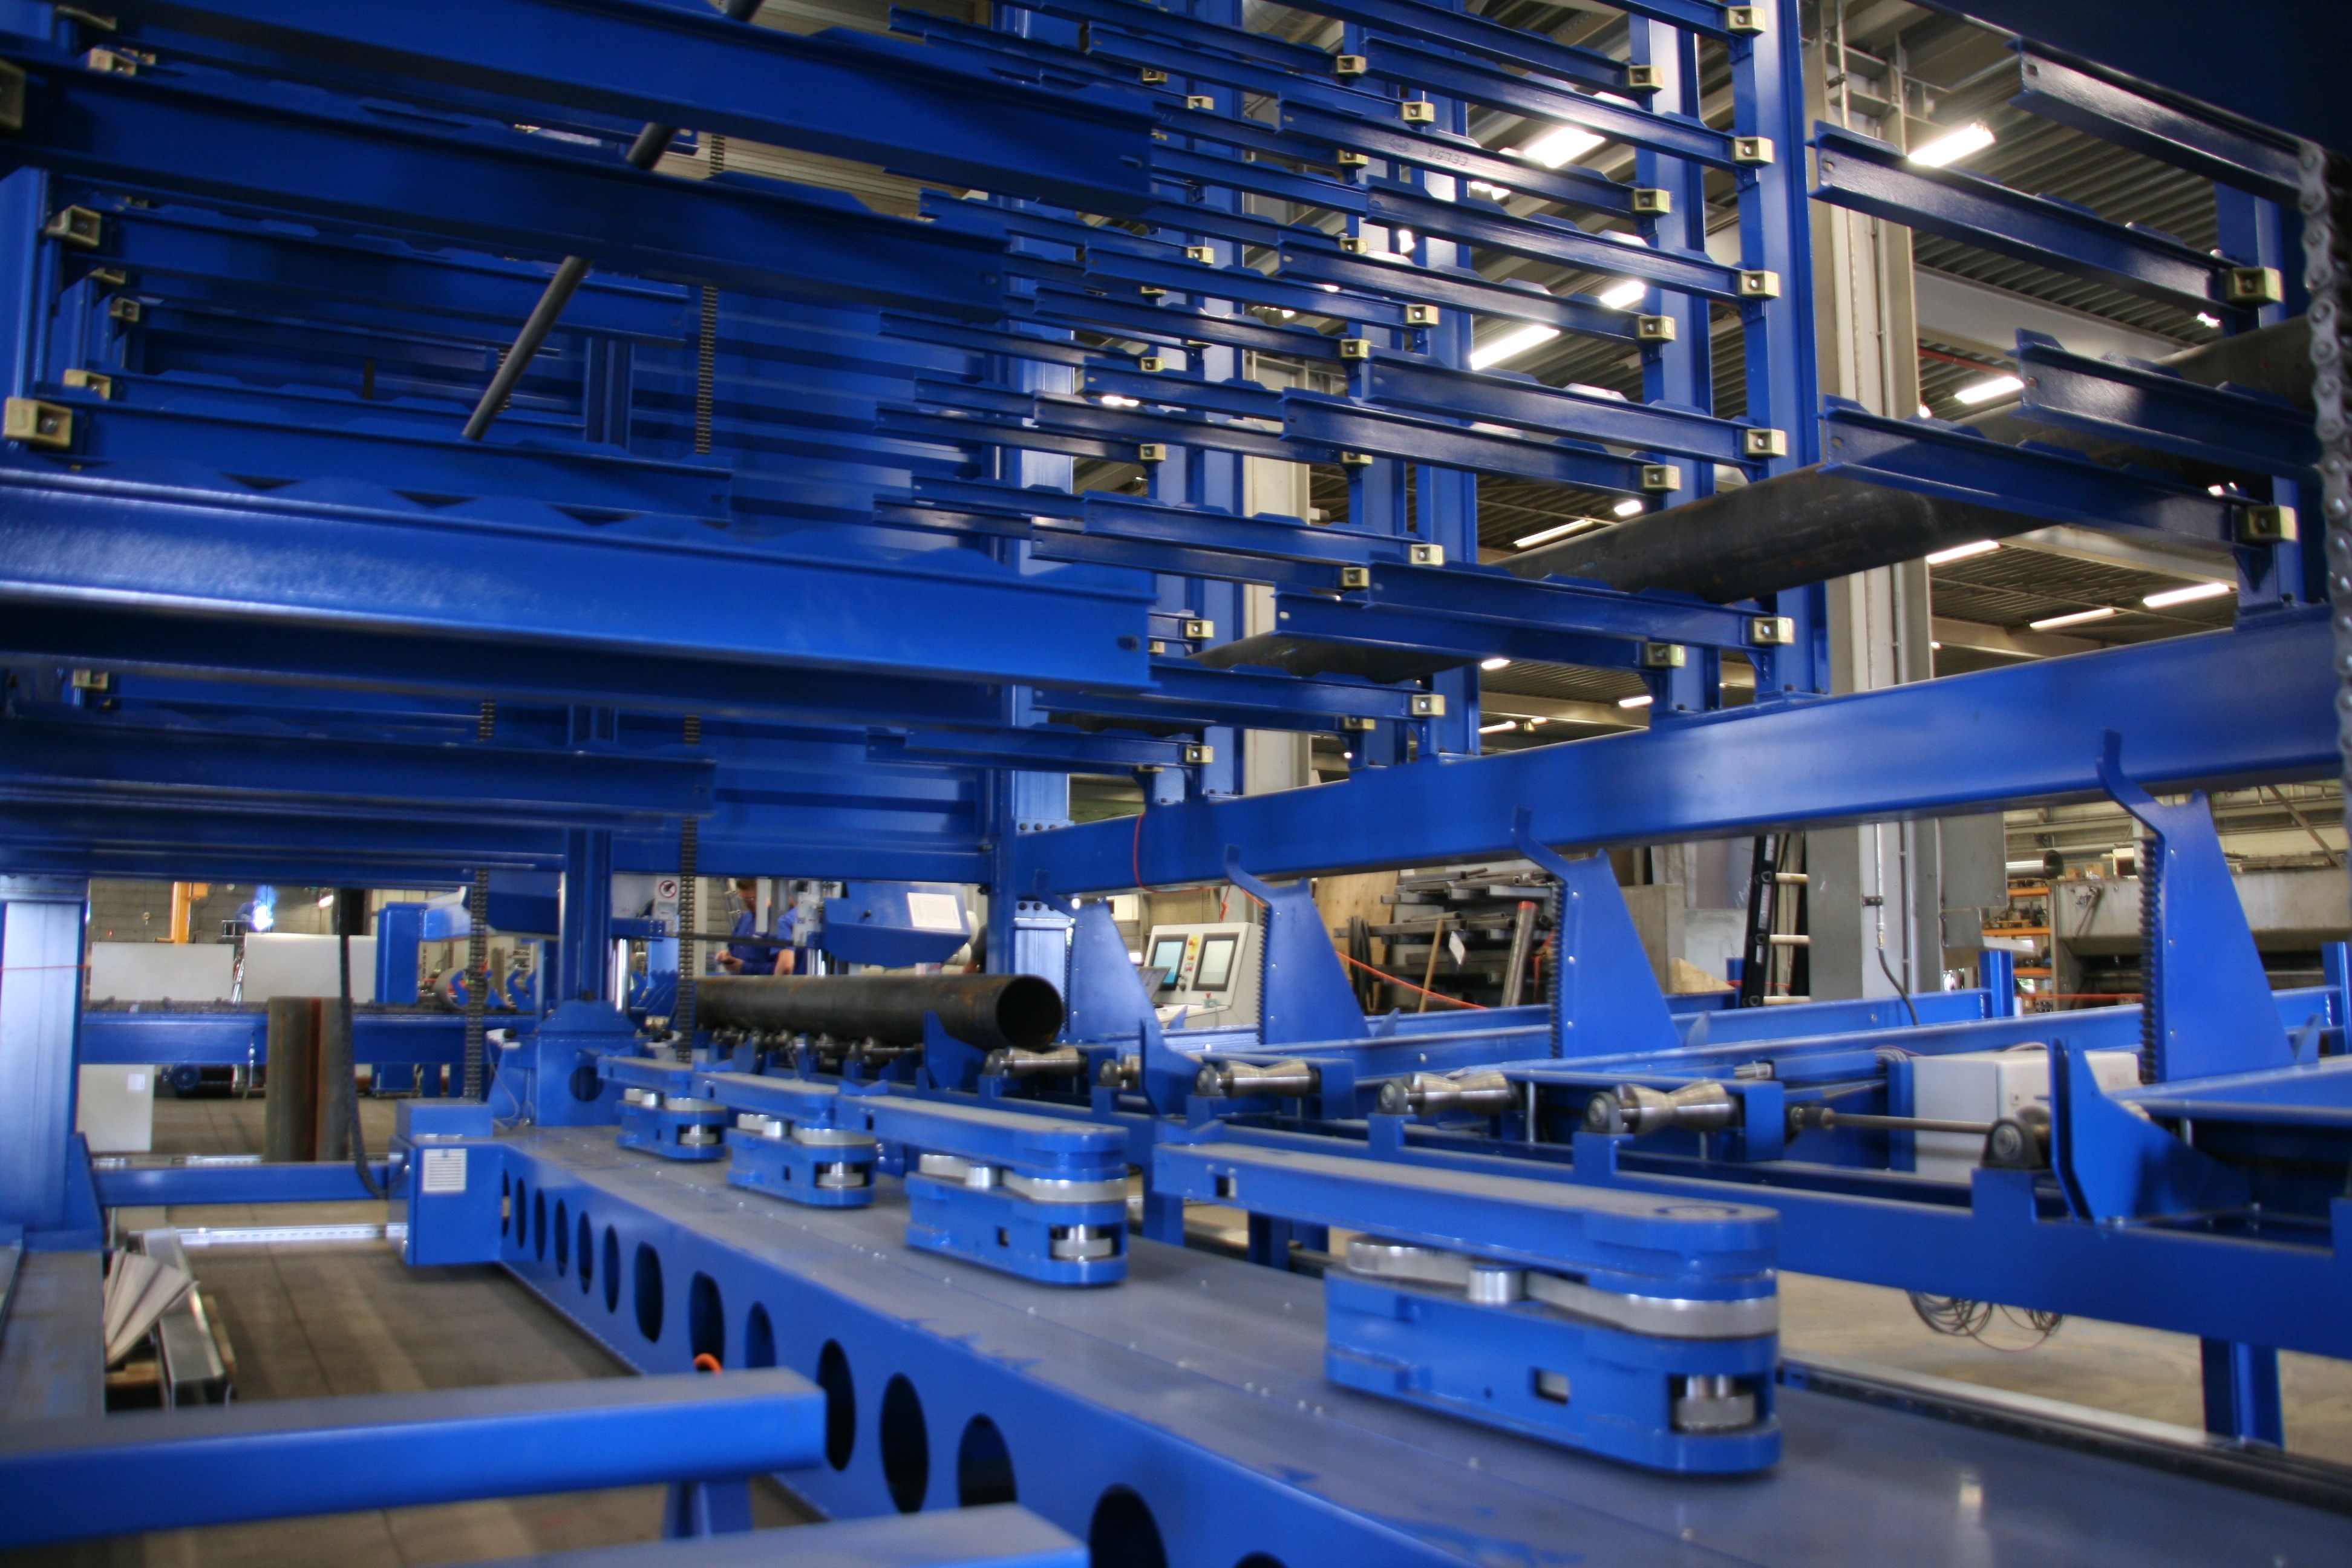 Profile cutting line including storage and logistics